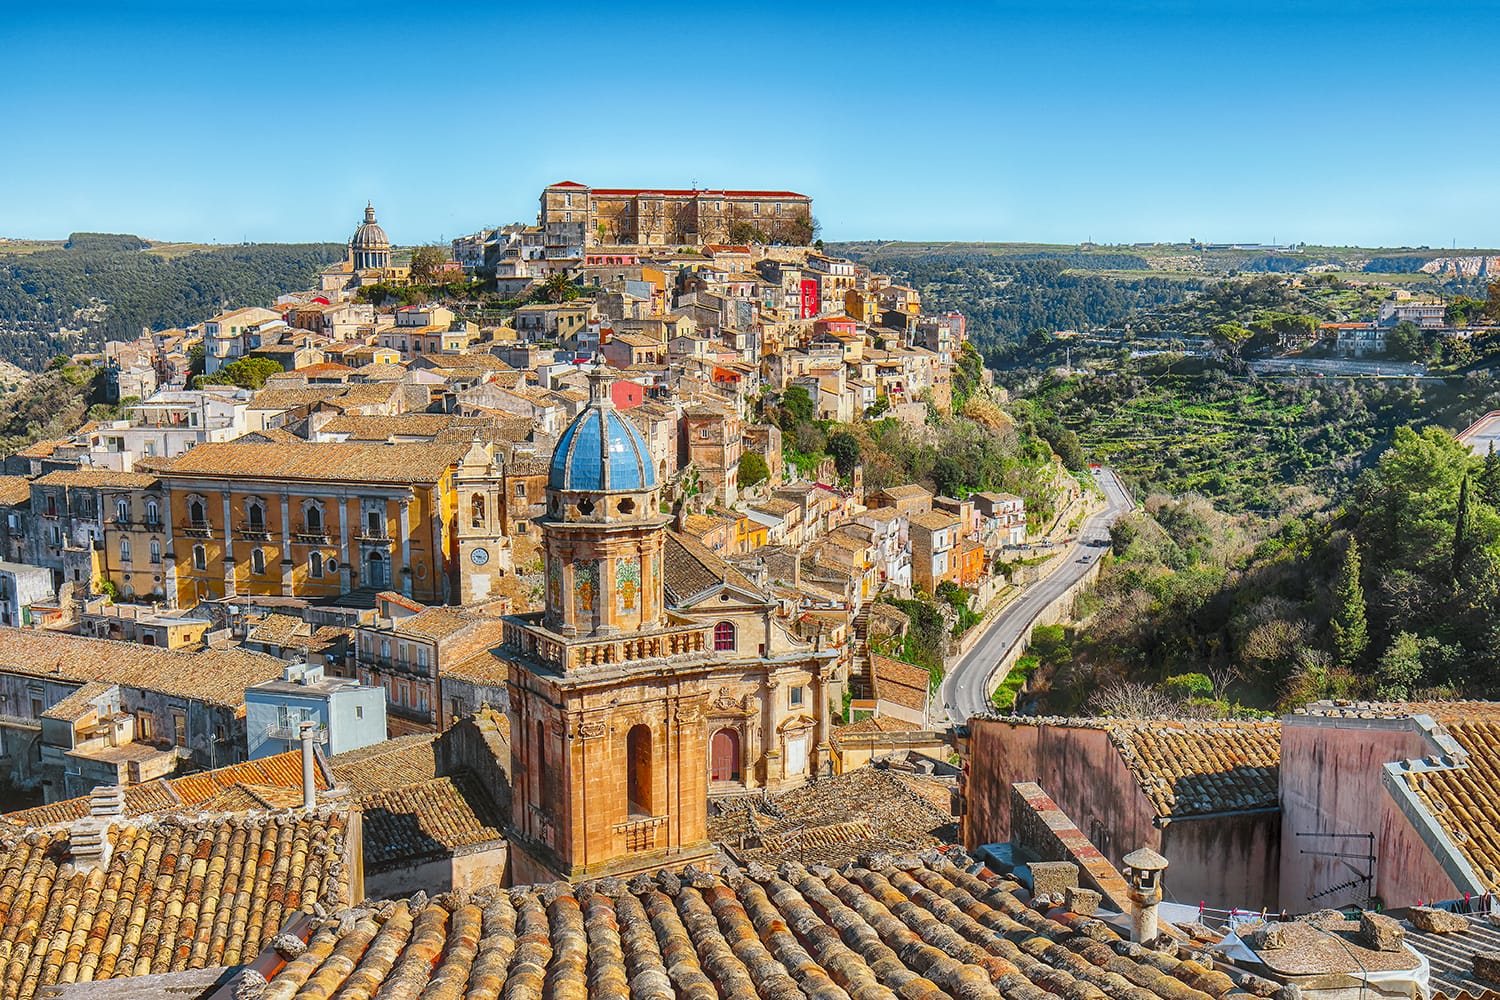 Sunrise at the old baroque town of Ragusa Ibla in Sicily. Historic center called Ibla builded in late Baroque Style. Ragusa, Sicily, Italy, Europe.